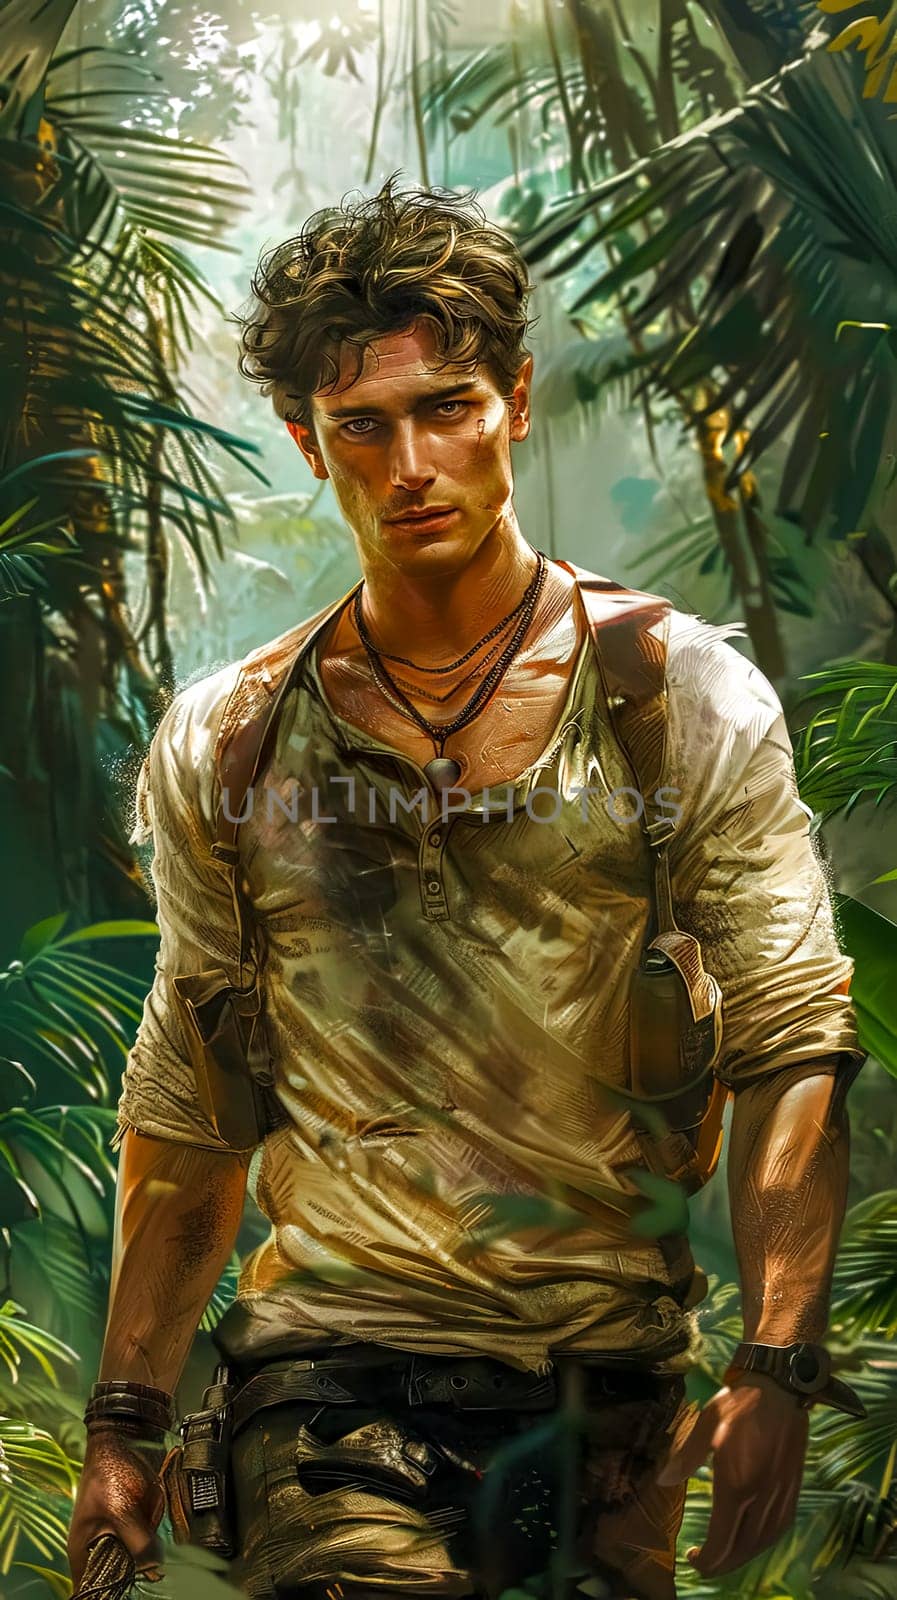 Adventurous Man in Jungle Environment with Rugged Outfit by Edophoto